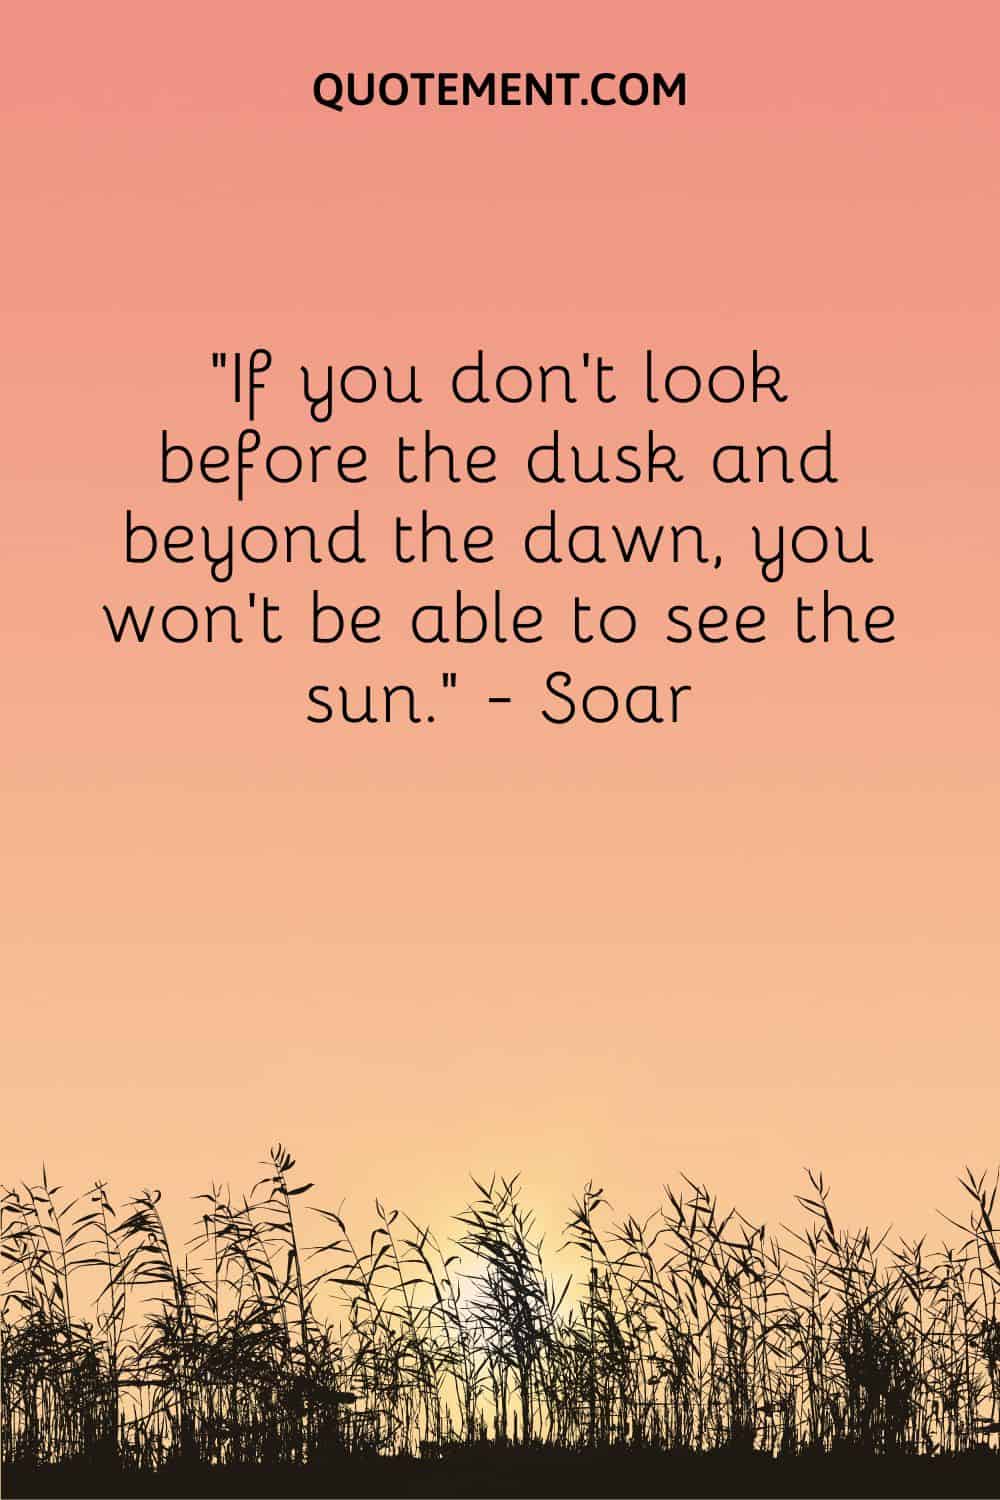 If you don’t look before the dusk and beyond the dawn, you won’t be able to see the sun.